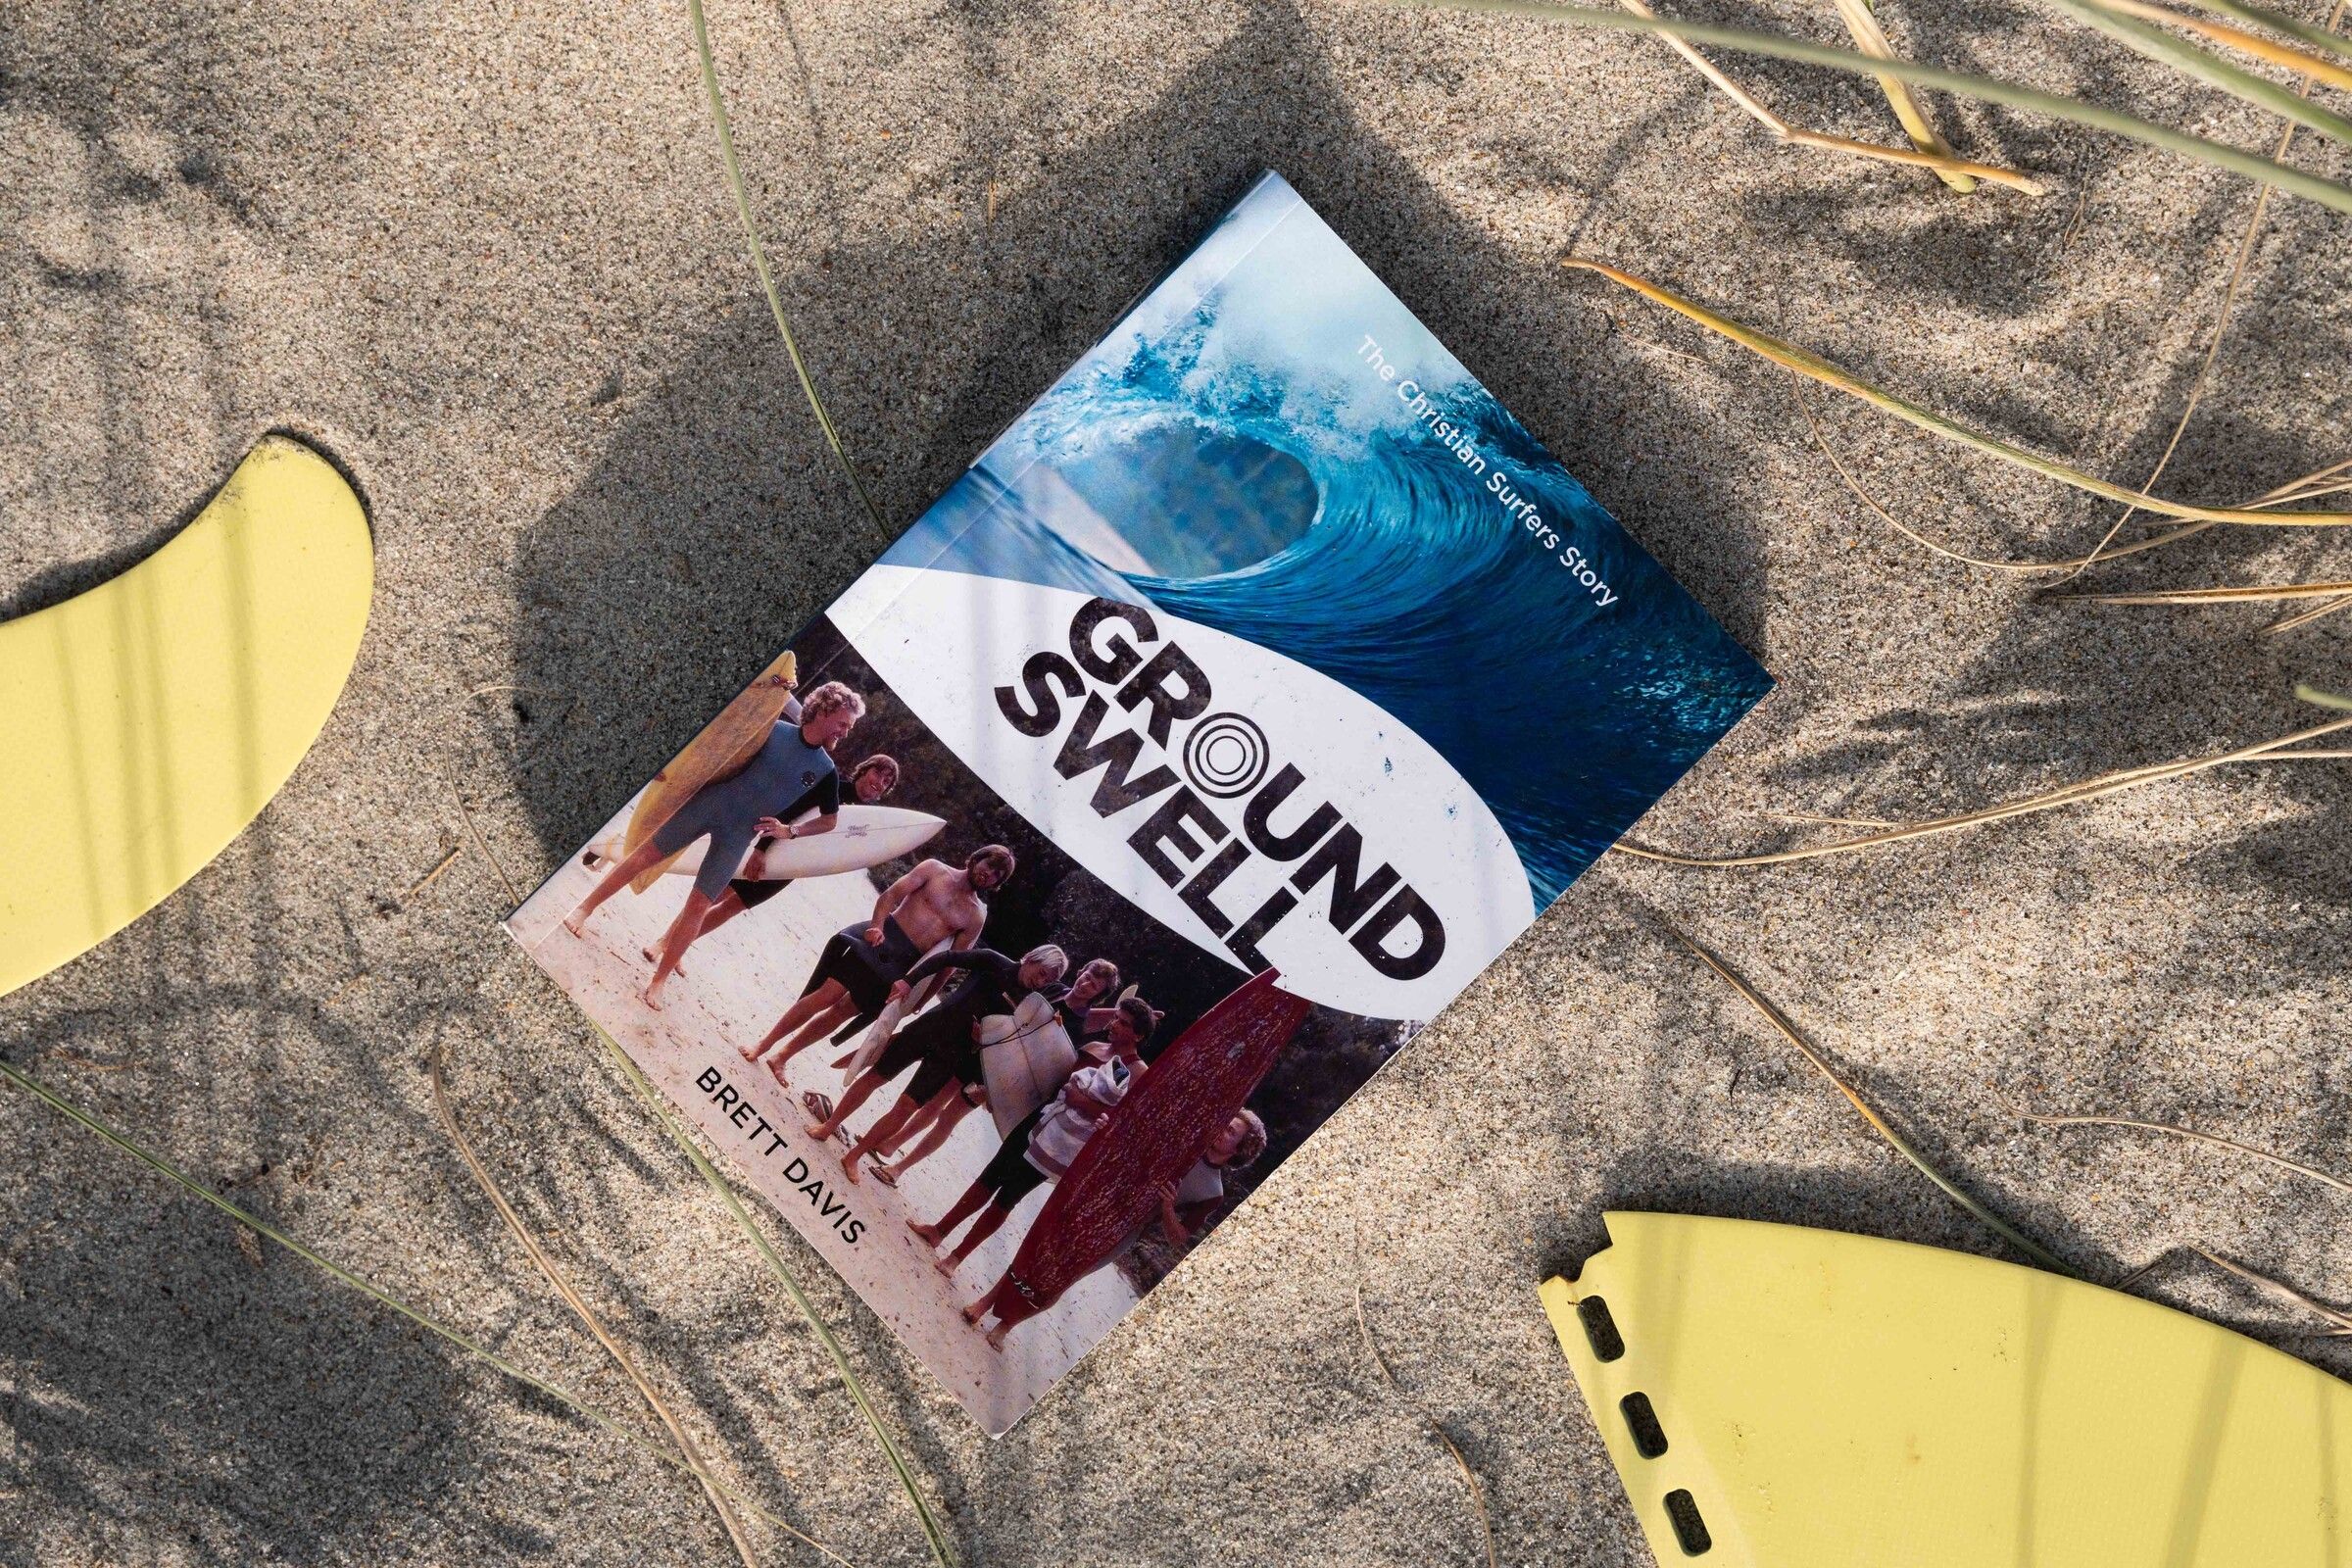 Groundswell Book